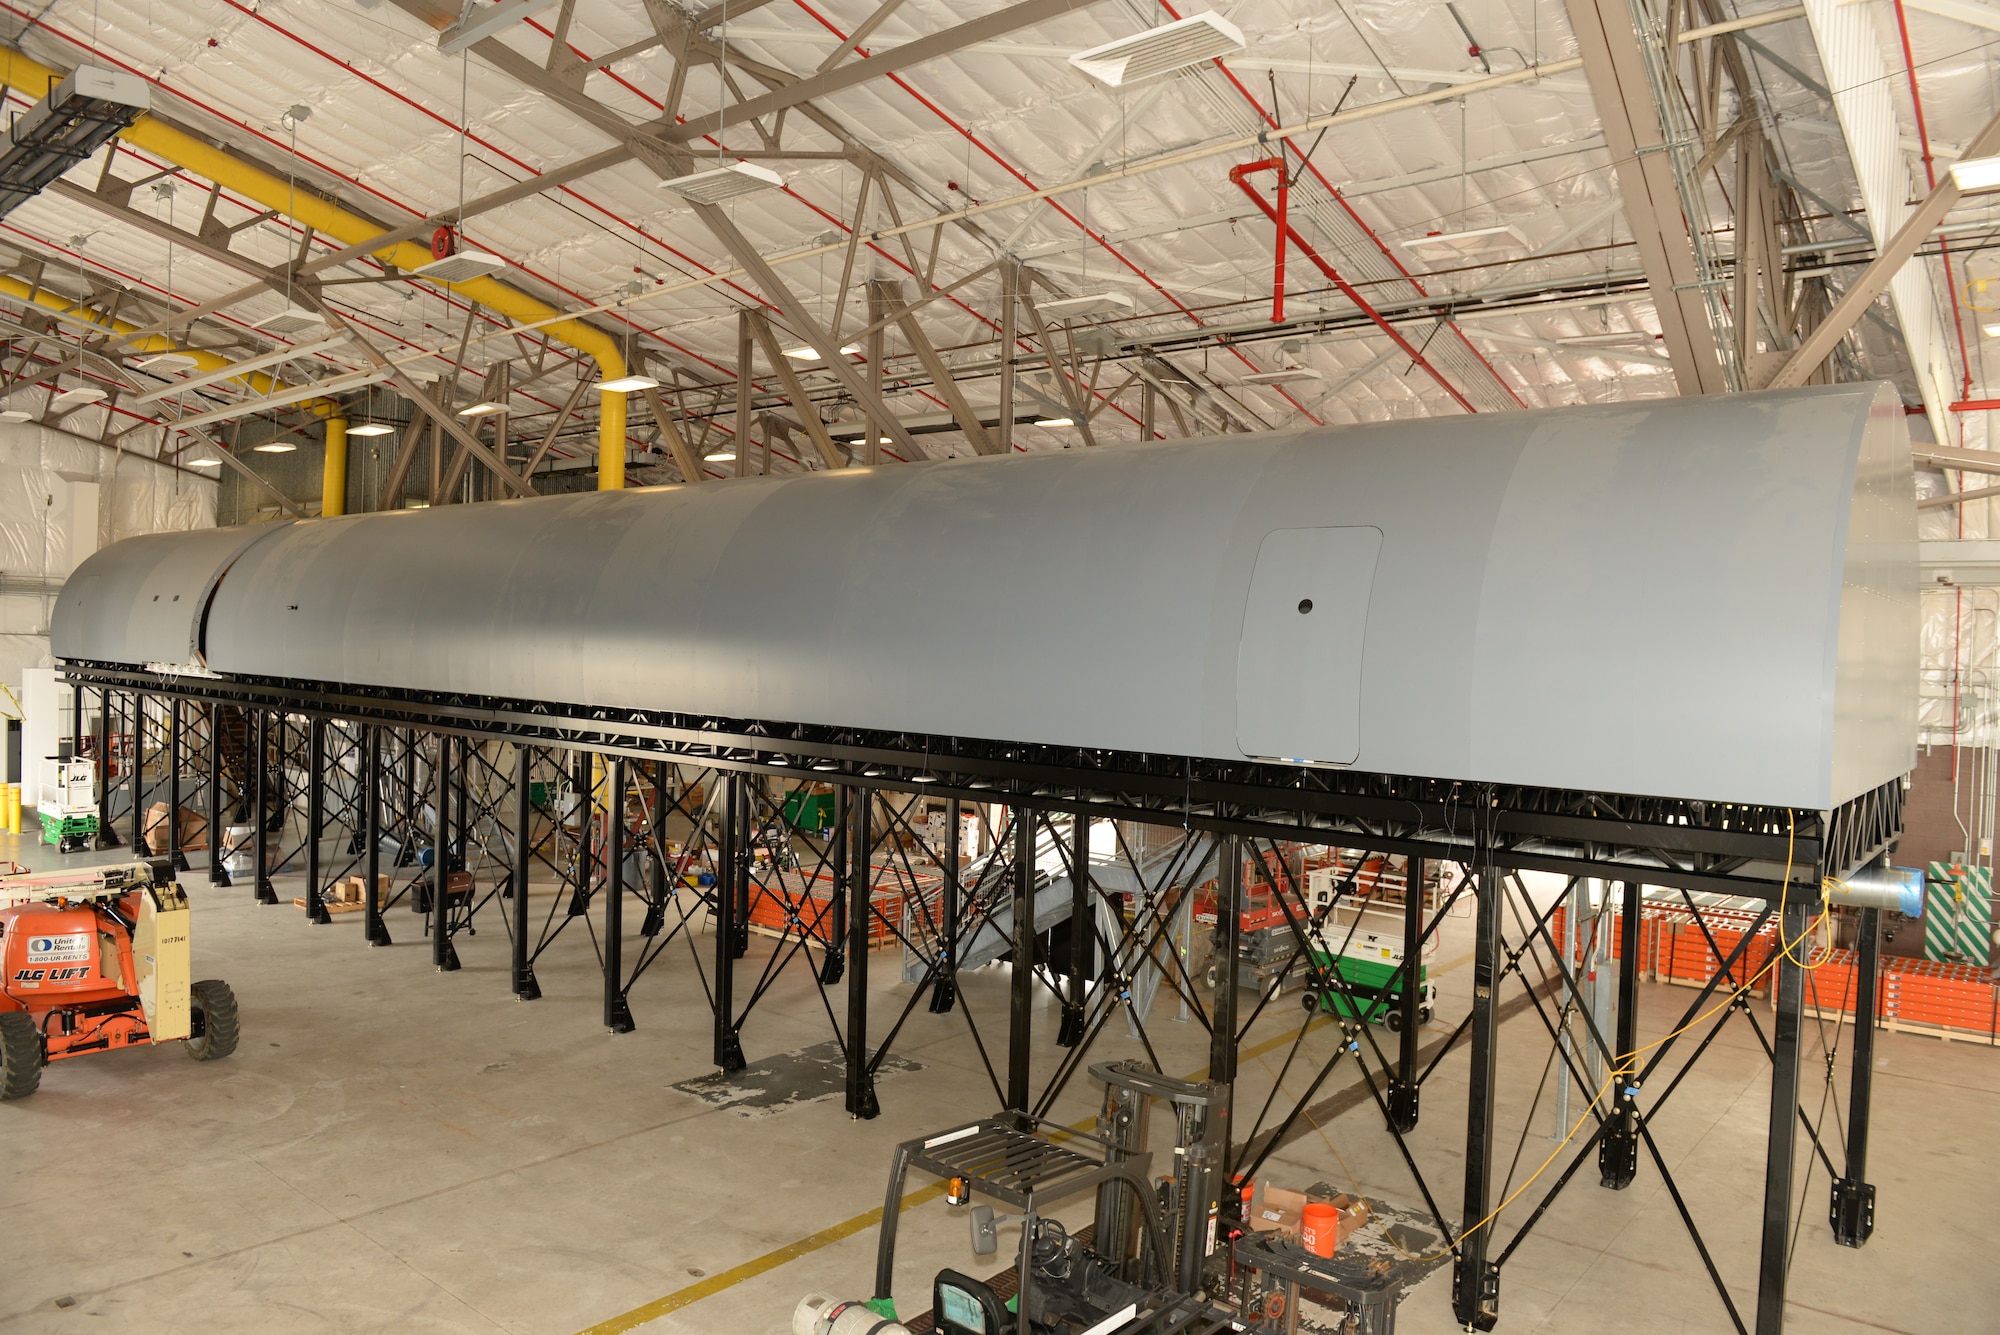 Installation of the KC-46A Fuselage Trainer or FuT, is nearing completion and will be ready to train aircrews starting Dec. 5, at Pease Air National Guard Base, Sept. 17, 2018. The FuT will primarily be used for training aircrews in preparation for working in the KC-46A airframe. (Photo by Master Sgt. Thomas Johnson, 157th ARW Public Affairs)